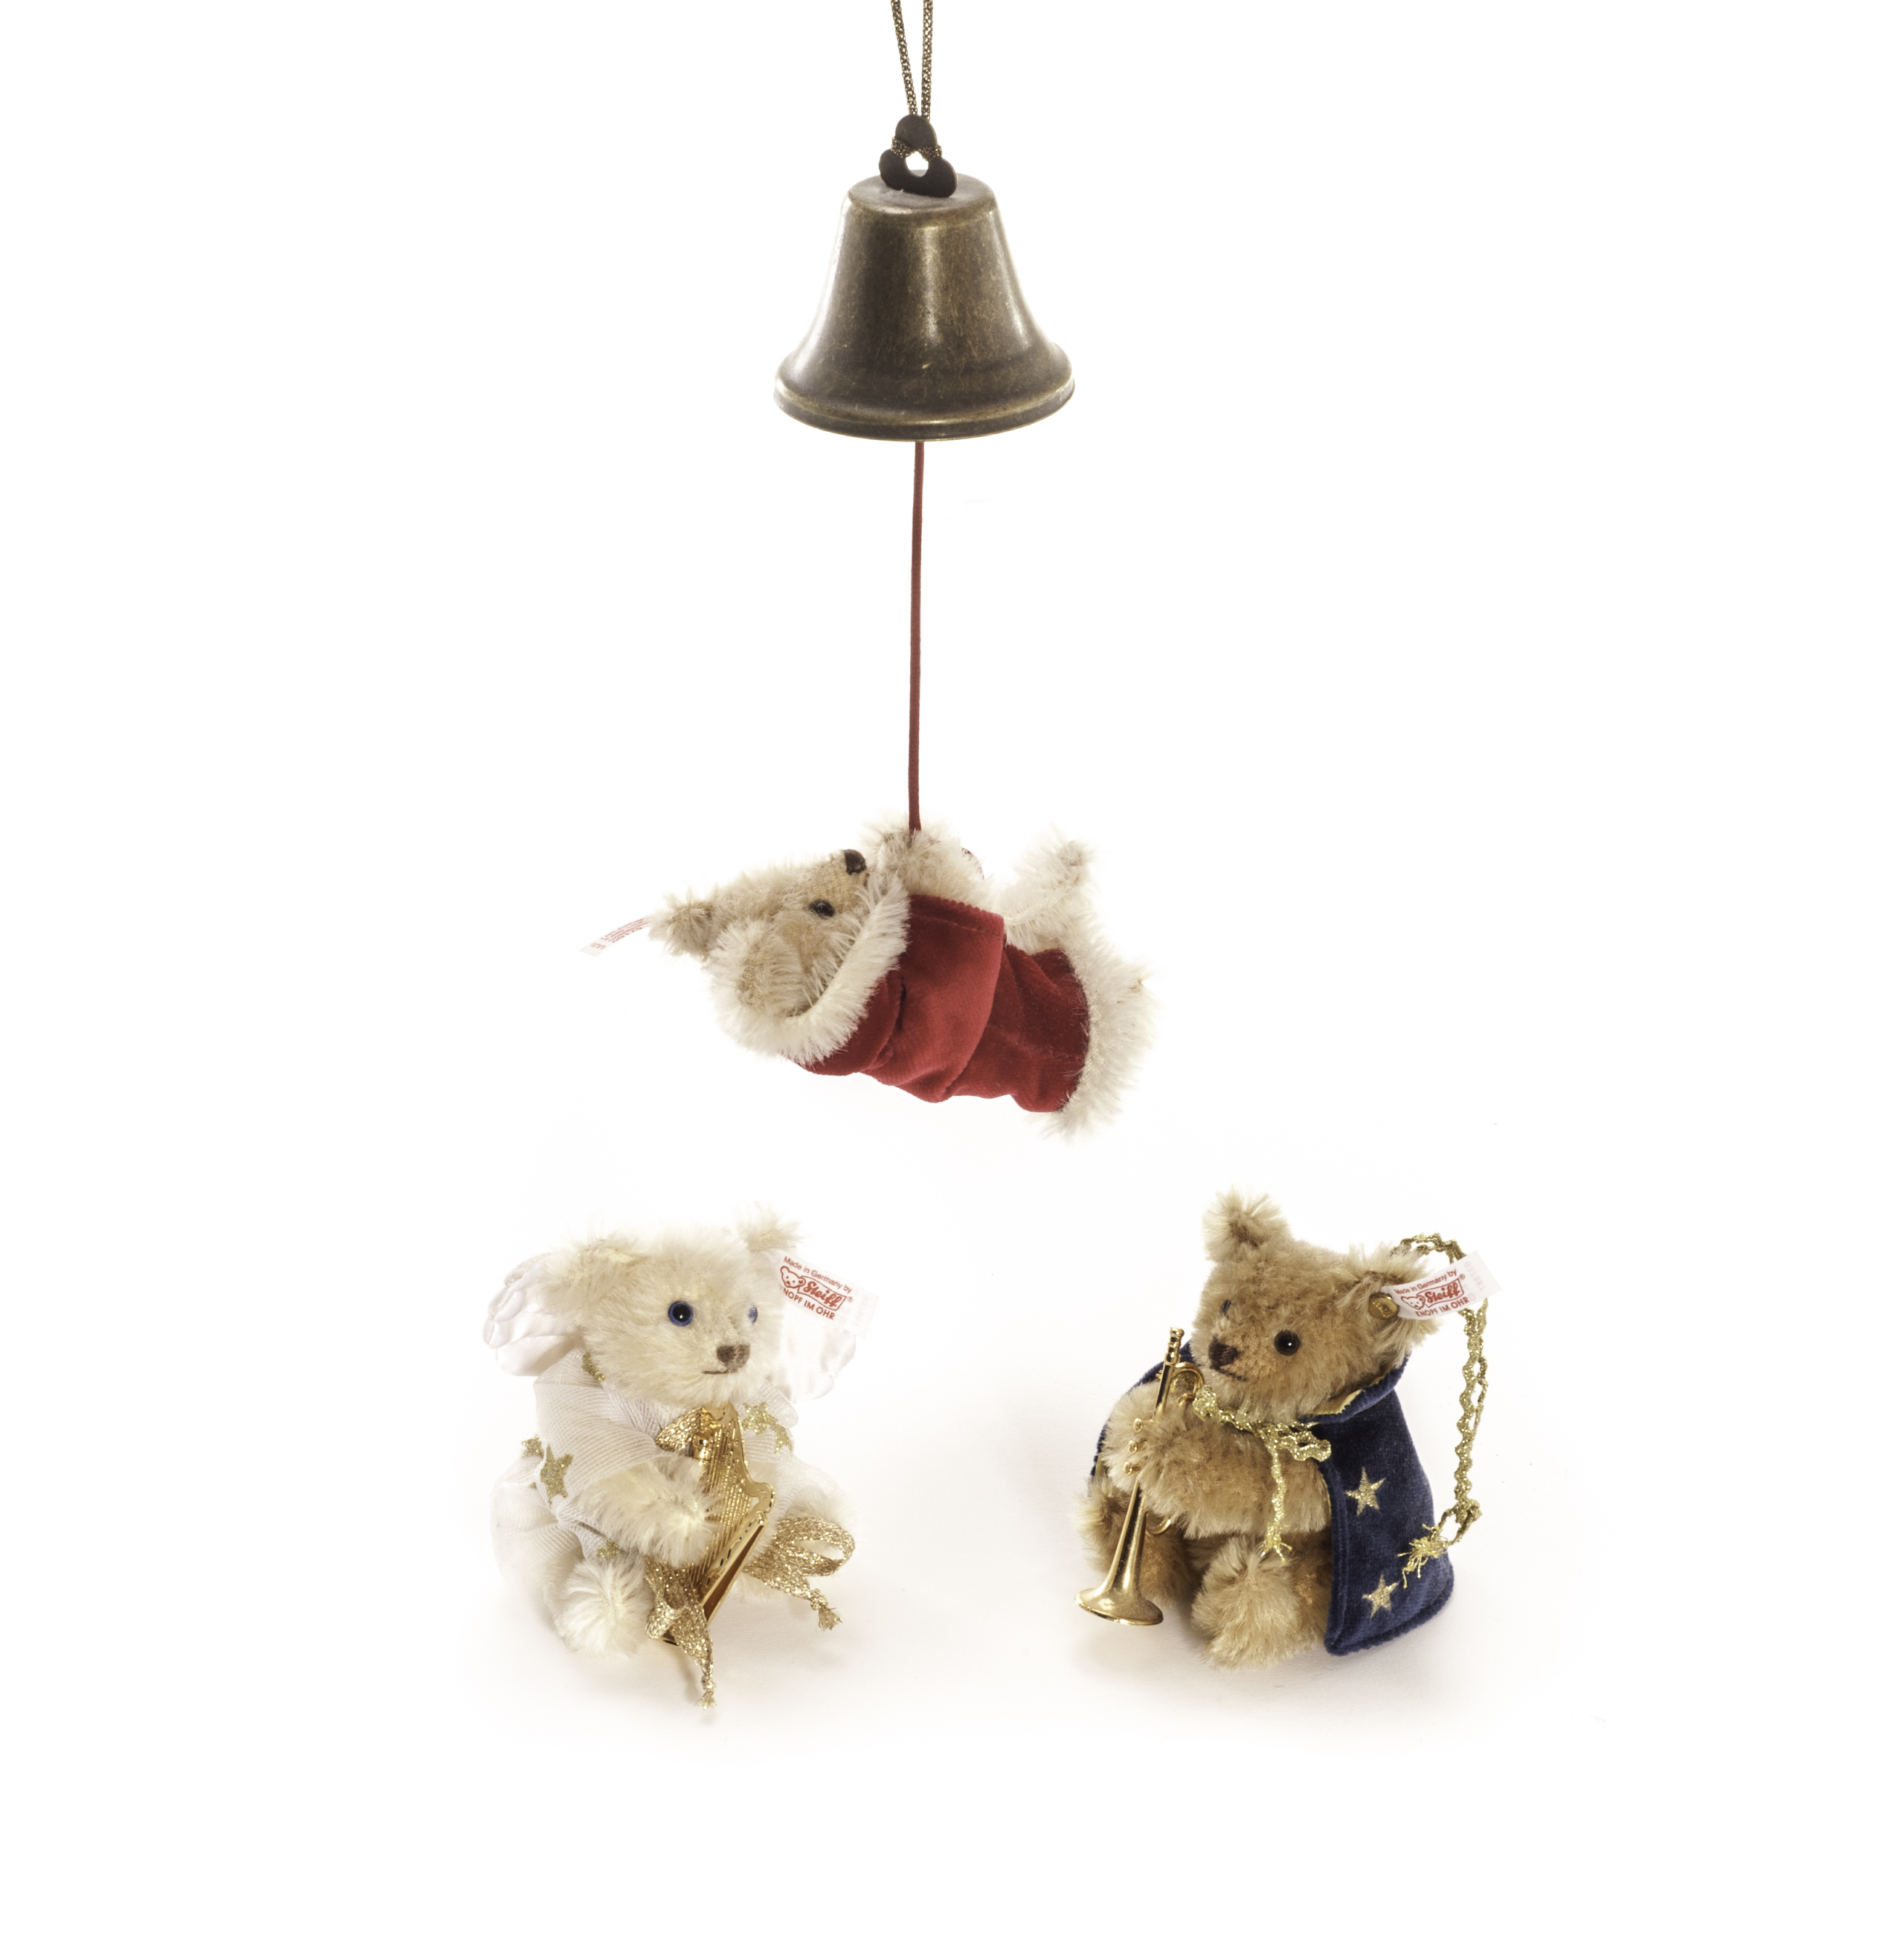 Three Limited Edition Teddy Bear Christmas Decorations: comprising Teddy Bear bell-ringer ornament,